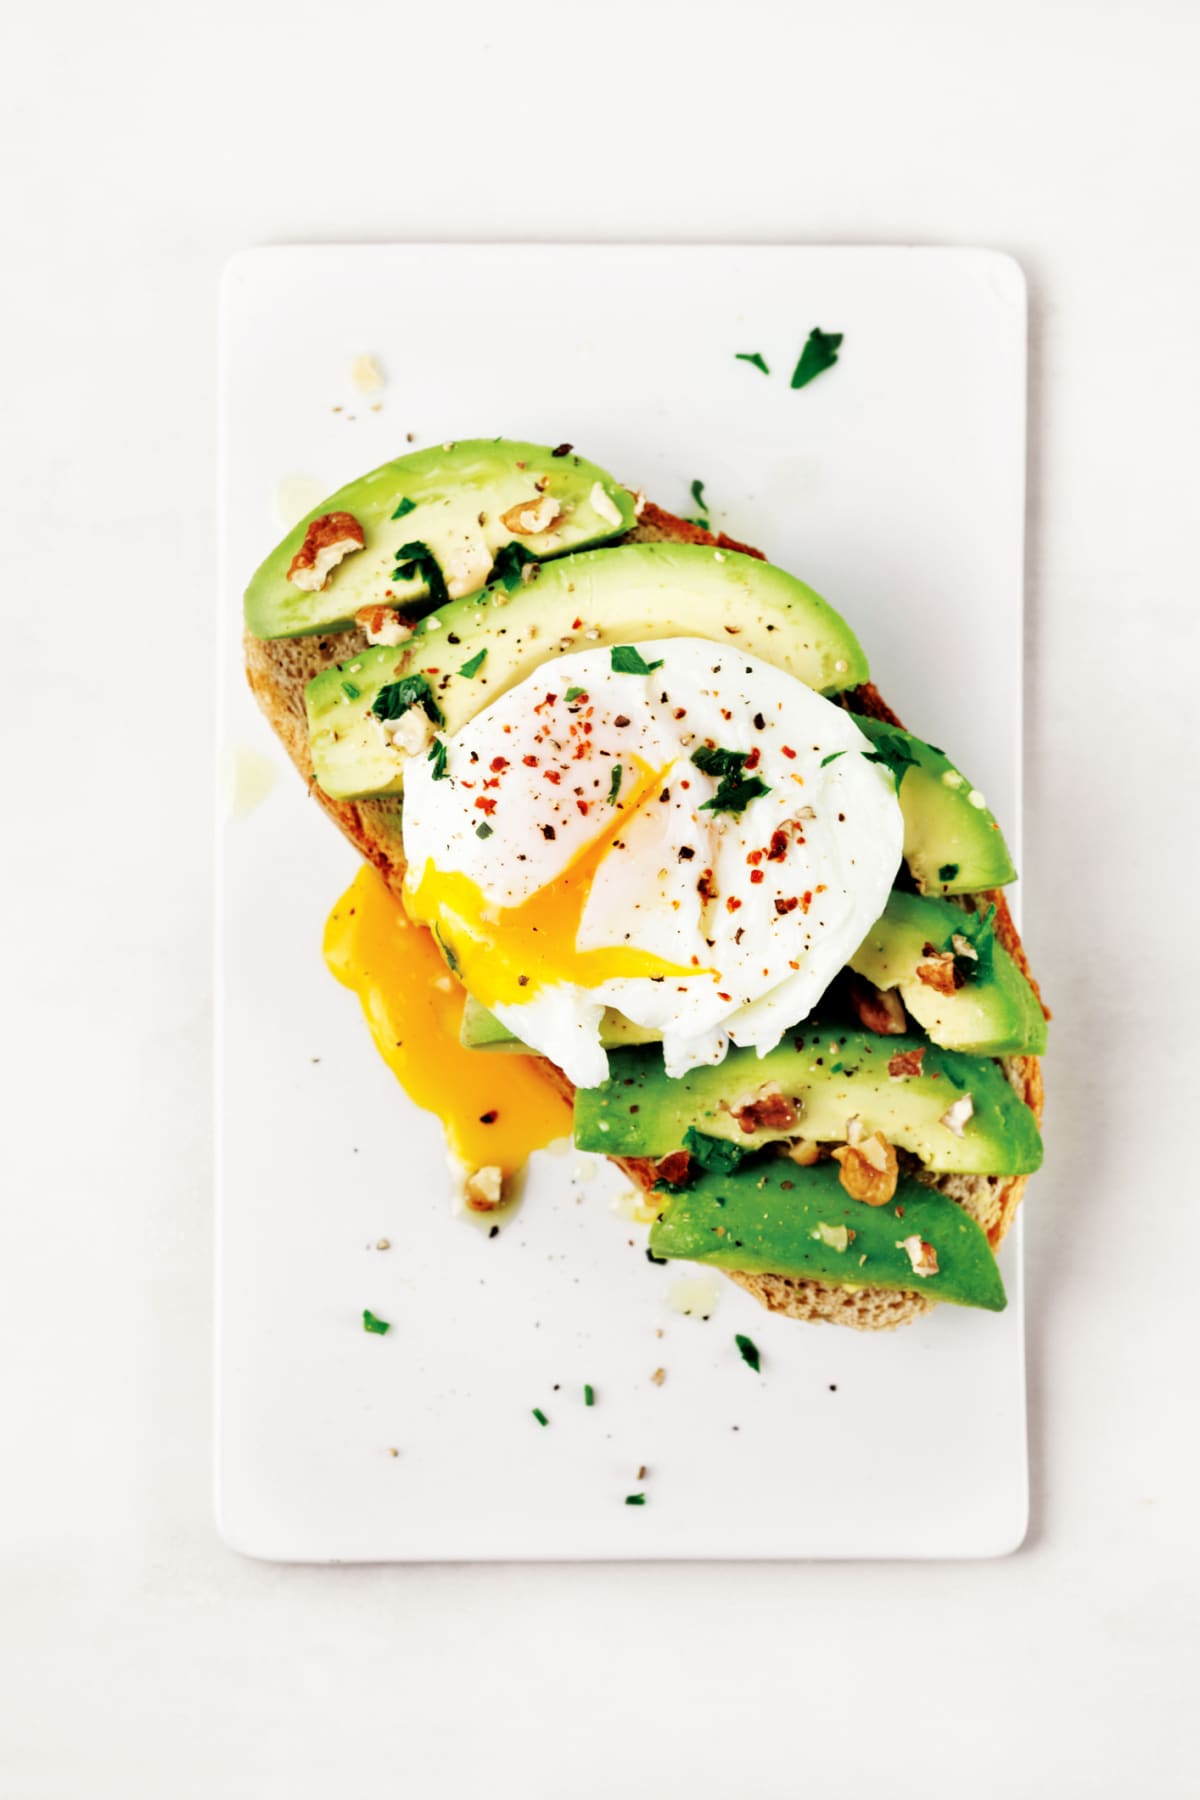 Poached egg on top of avocado toast with fresh herb and spice garnishes